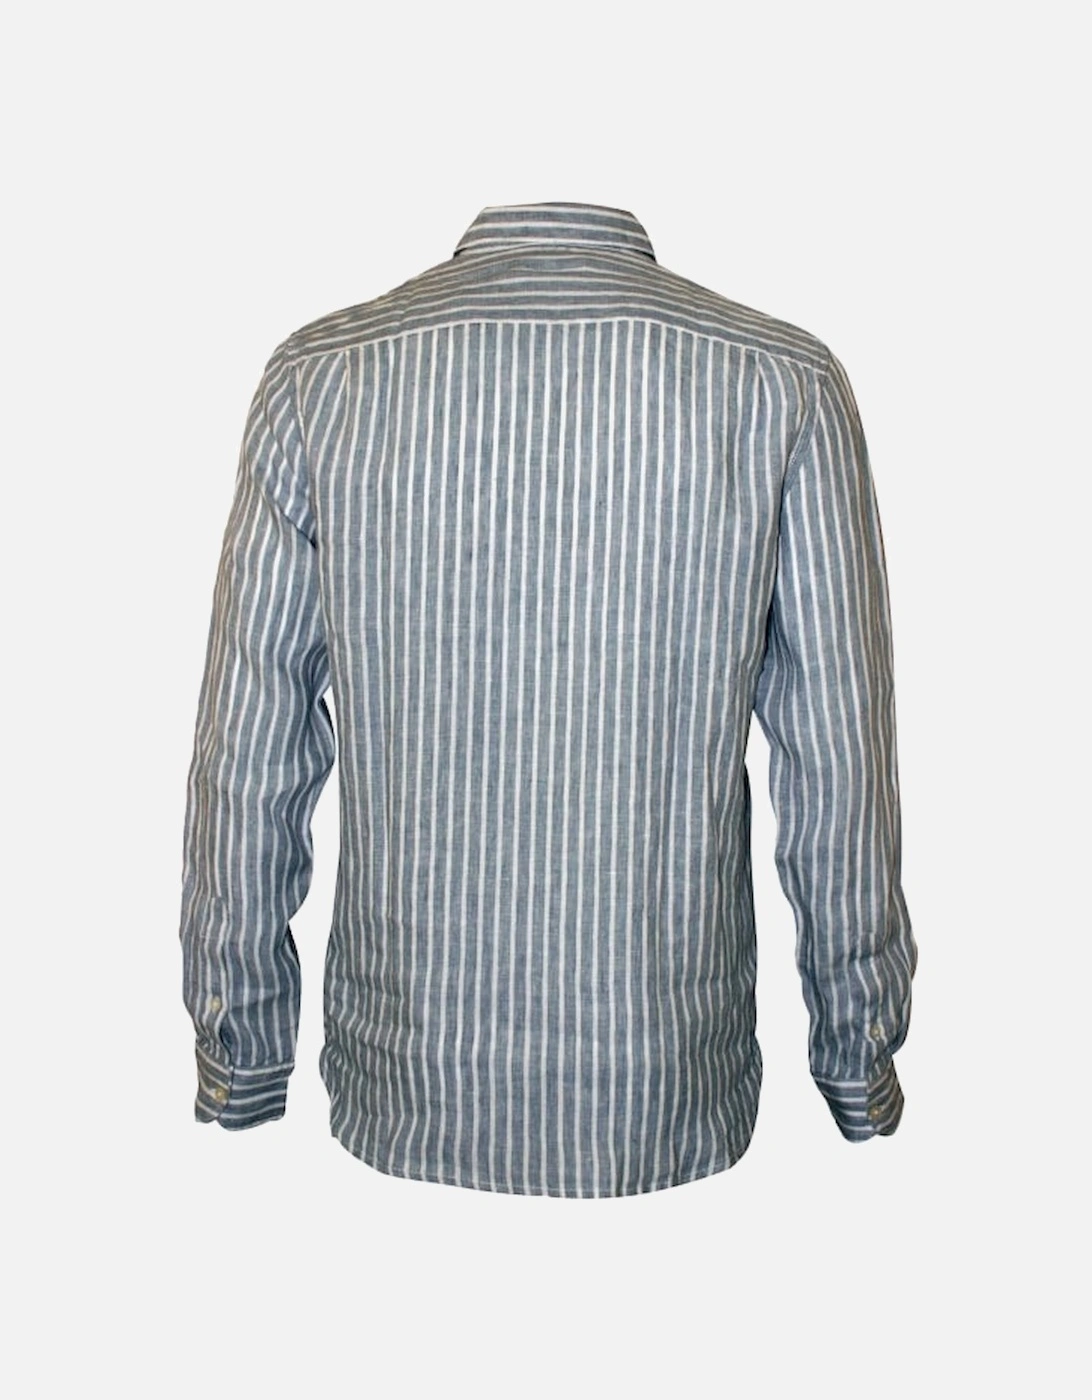 Striped Relaxed-Fit Linen Shirt, Grey/White